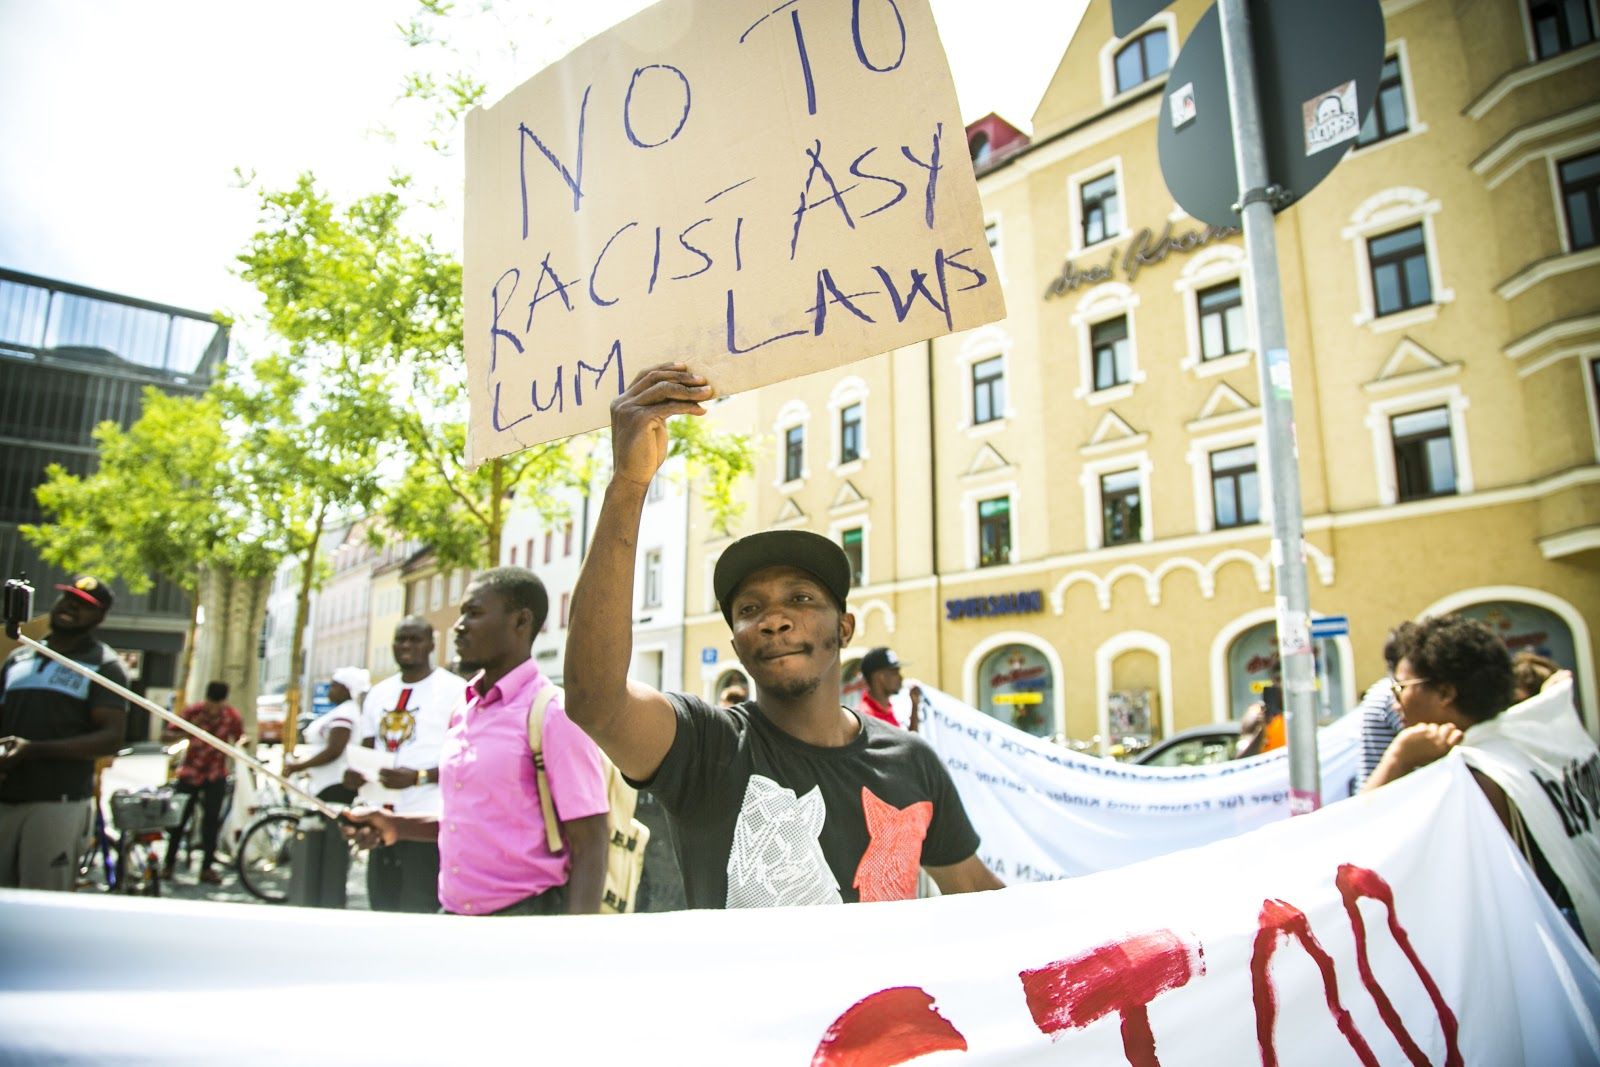 A Nigerian asylum seeker holds up a sign during a protest of Anker centers in Bavaria, Germany. Image by Angelica Ekeke. Germany, 2019.